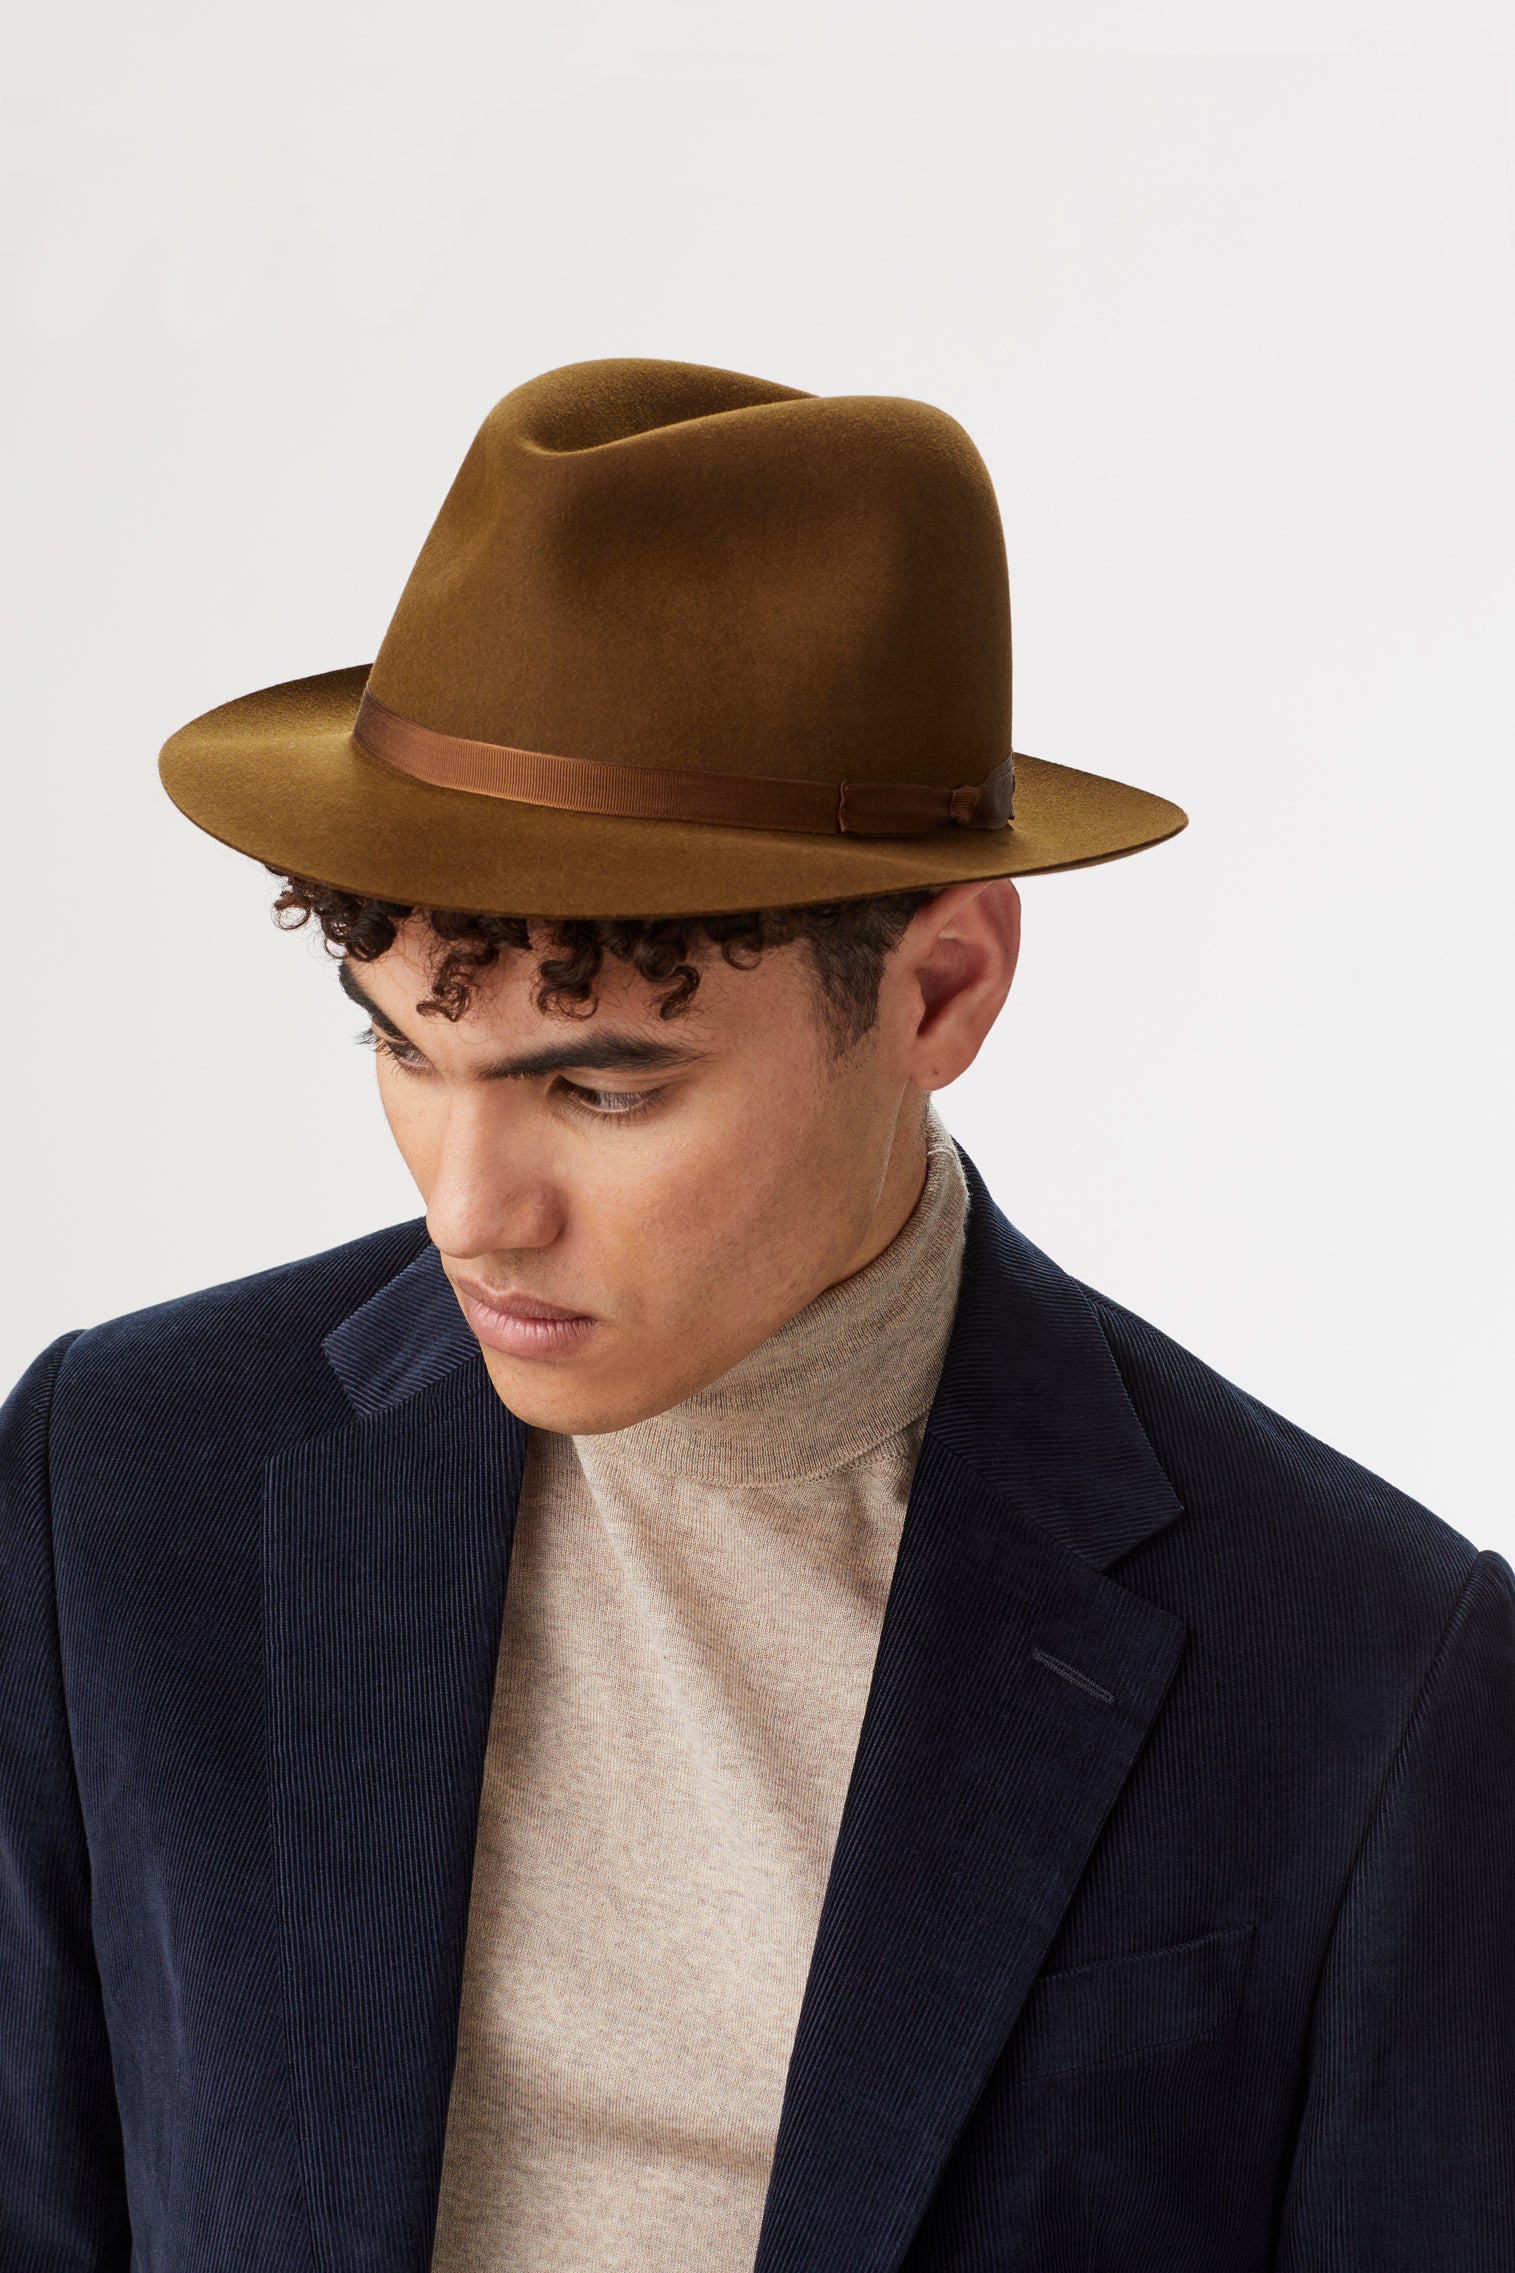 Voyager Rollable Trilby - Men's Packable & Rollable Hats - Lock & Co. Hatters London UK